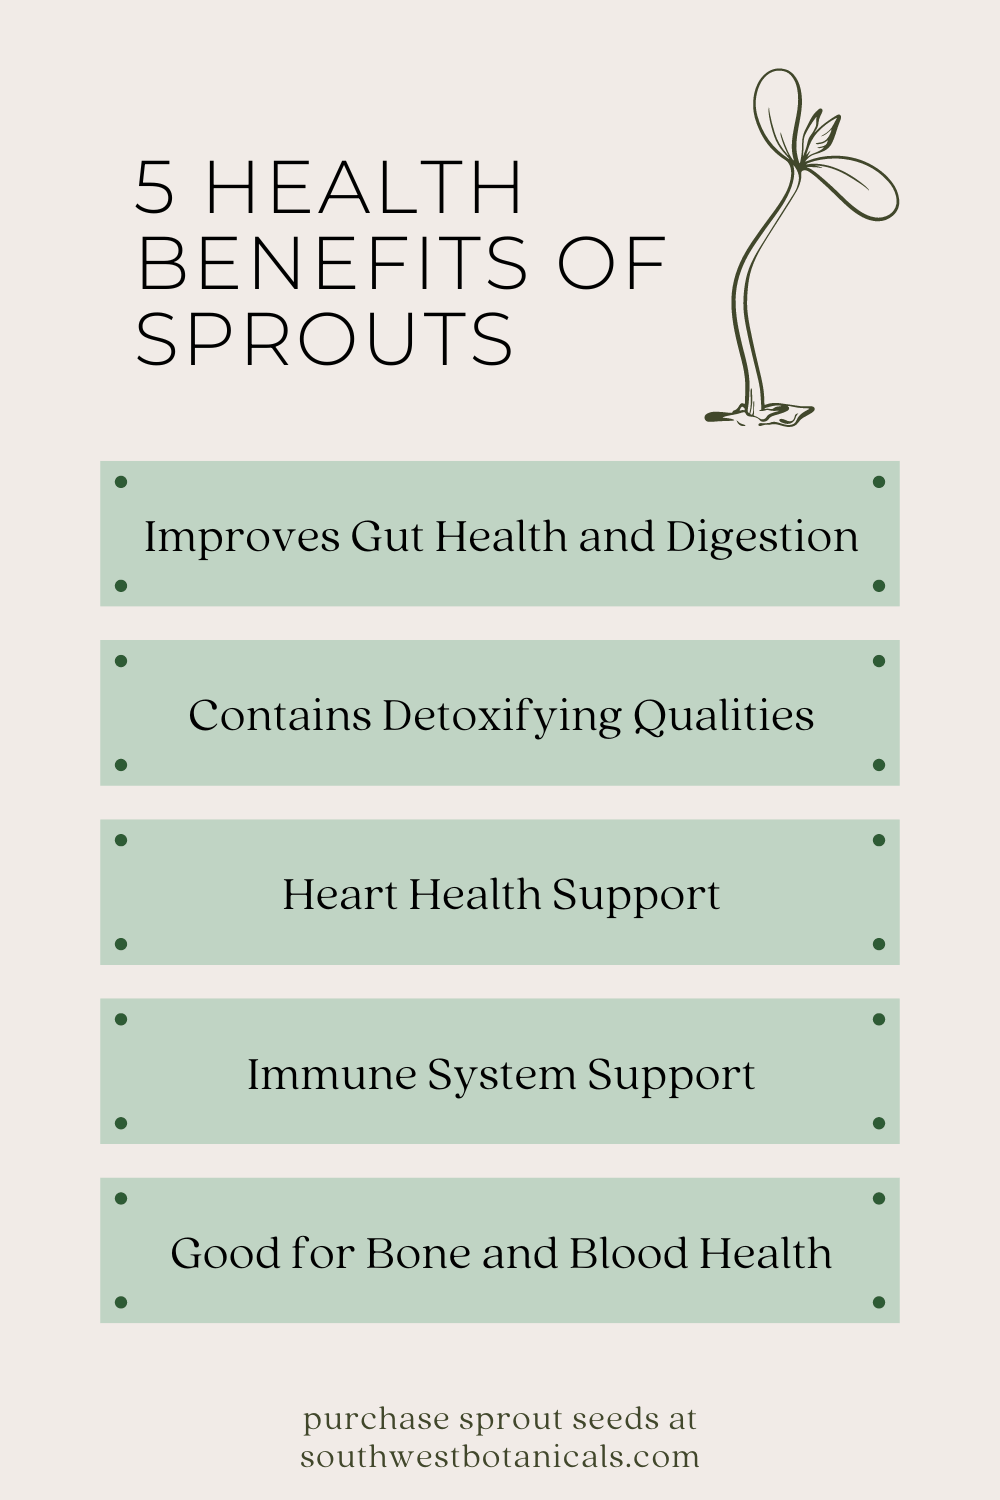 5-health-benefits-of-sprouts2.png